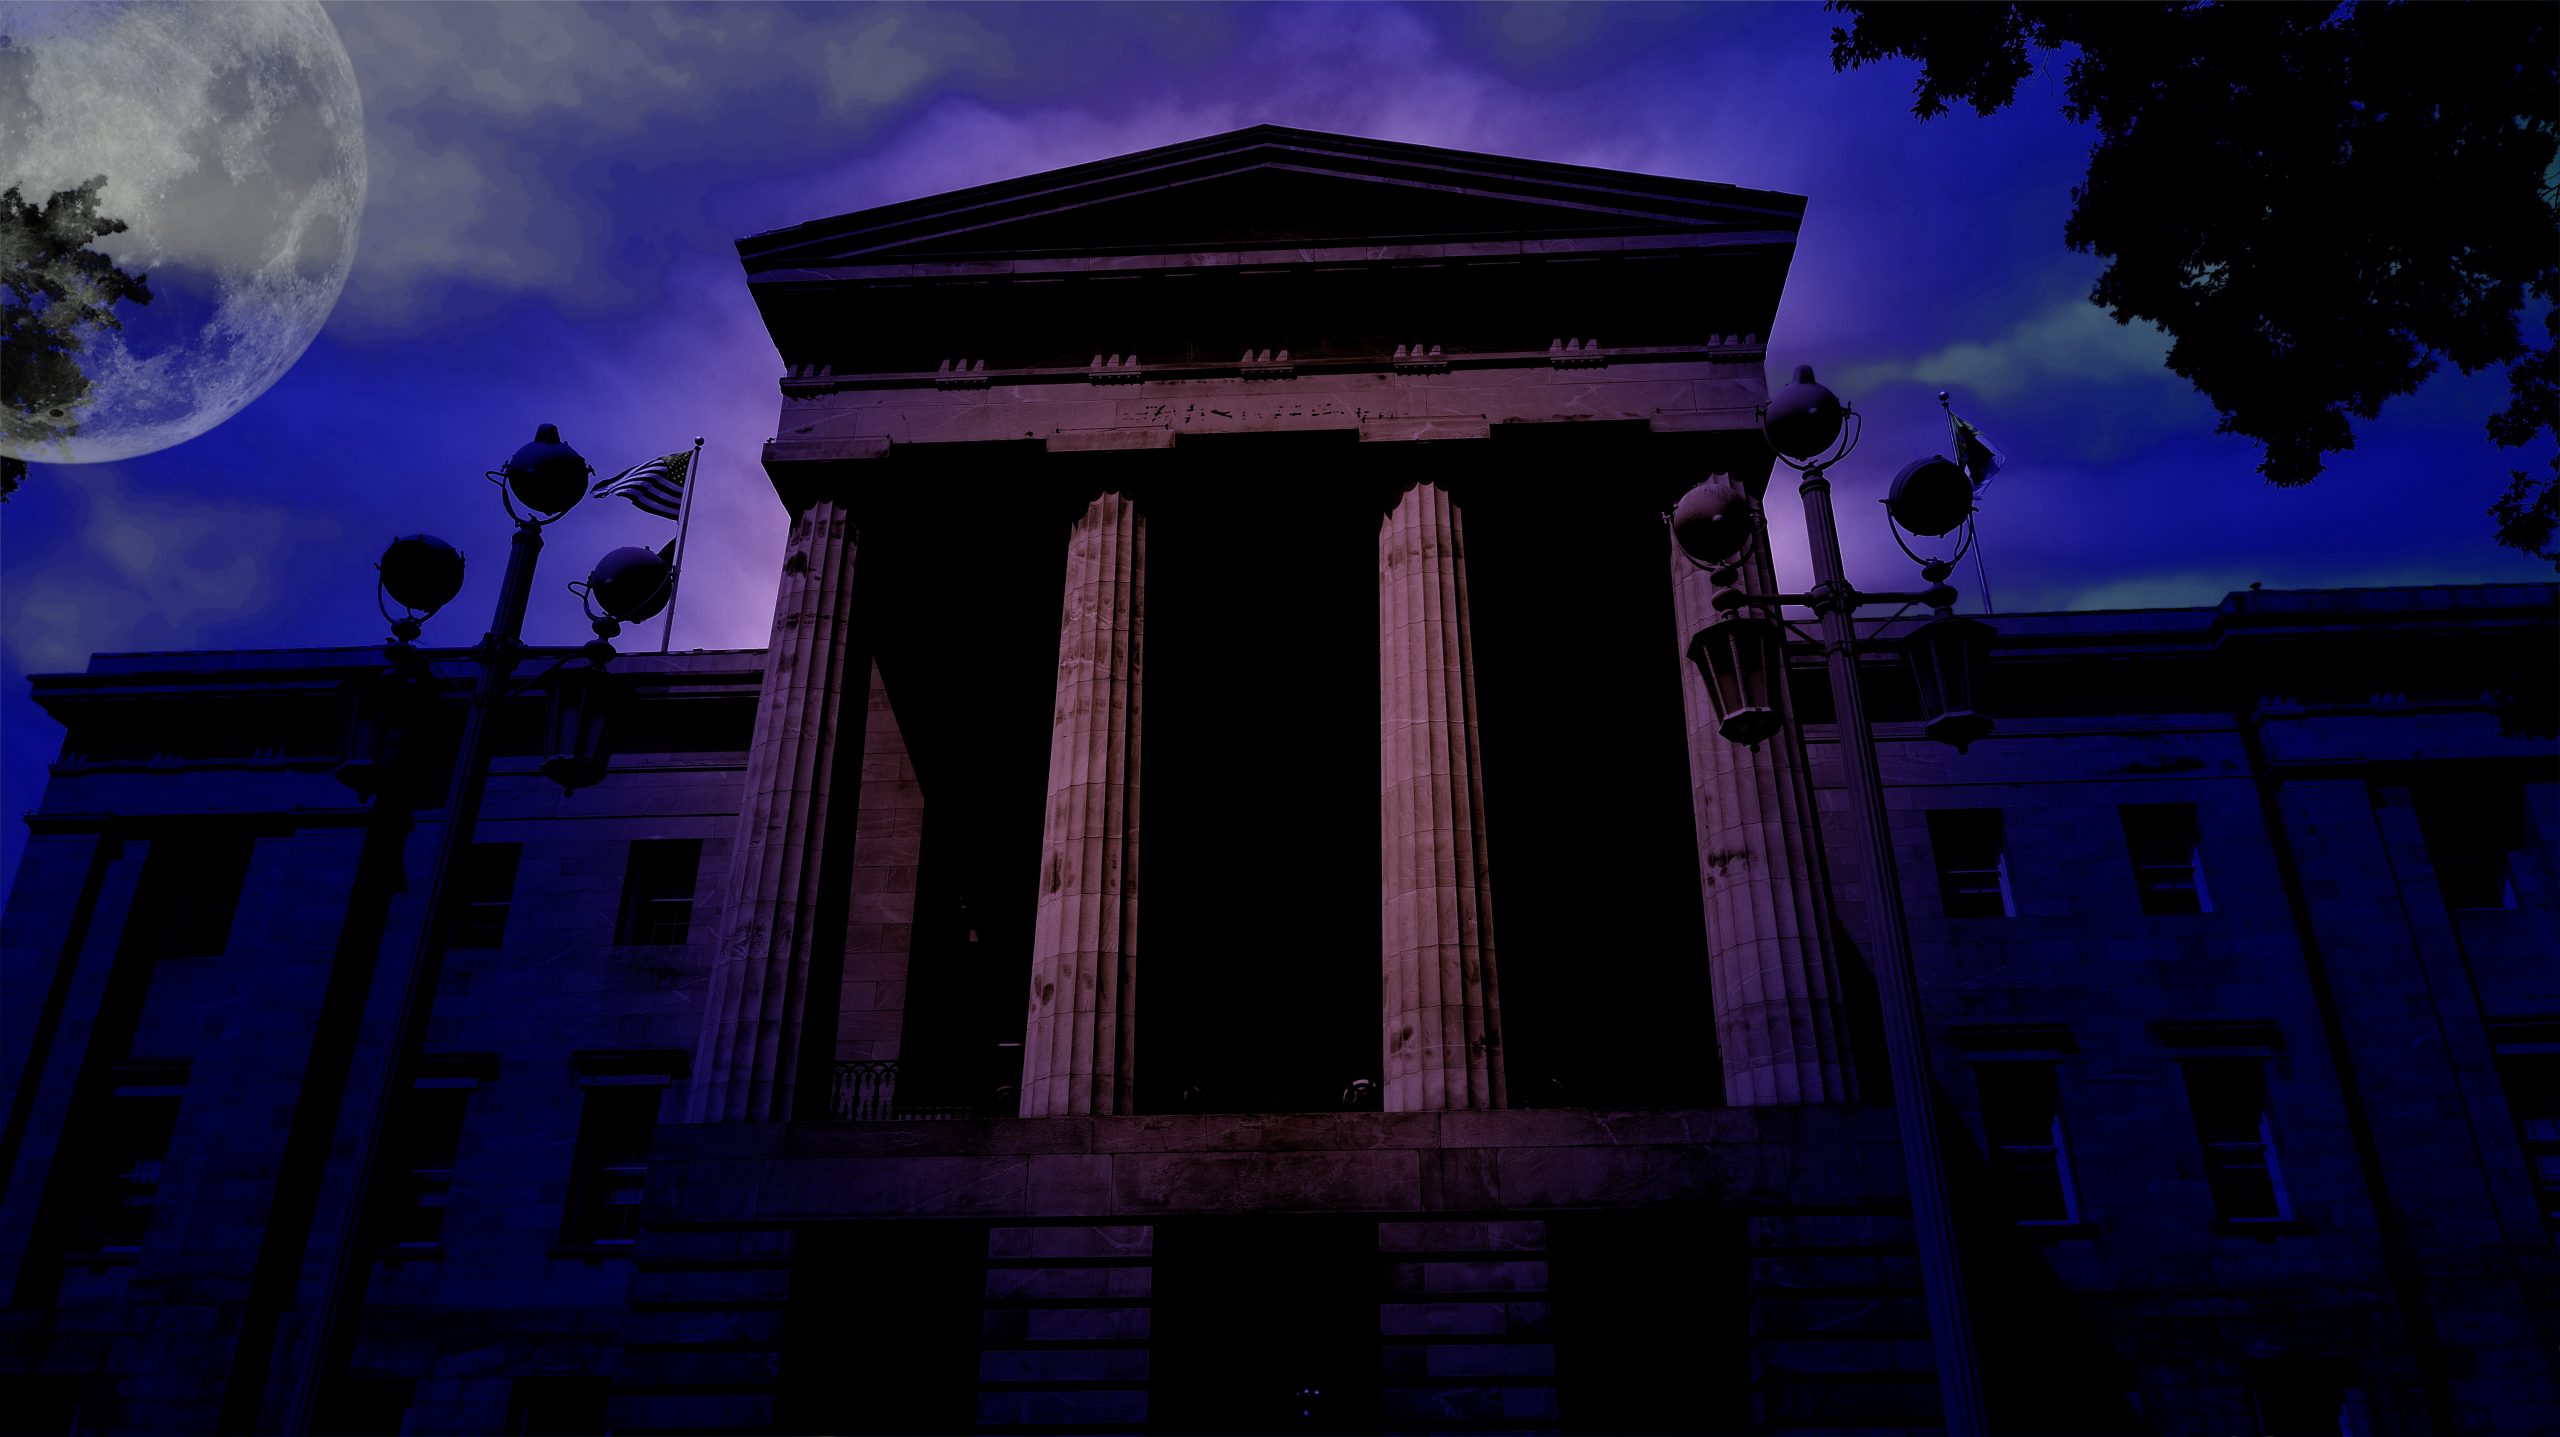 The North Carolina State Capitol Building at night underneath a full moon, haunted site in Raleigh, NC and on the Raleigh Ghosts Haunted Tour.